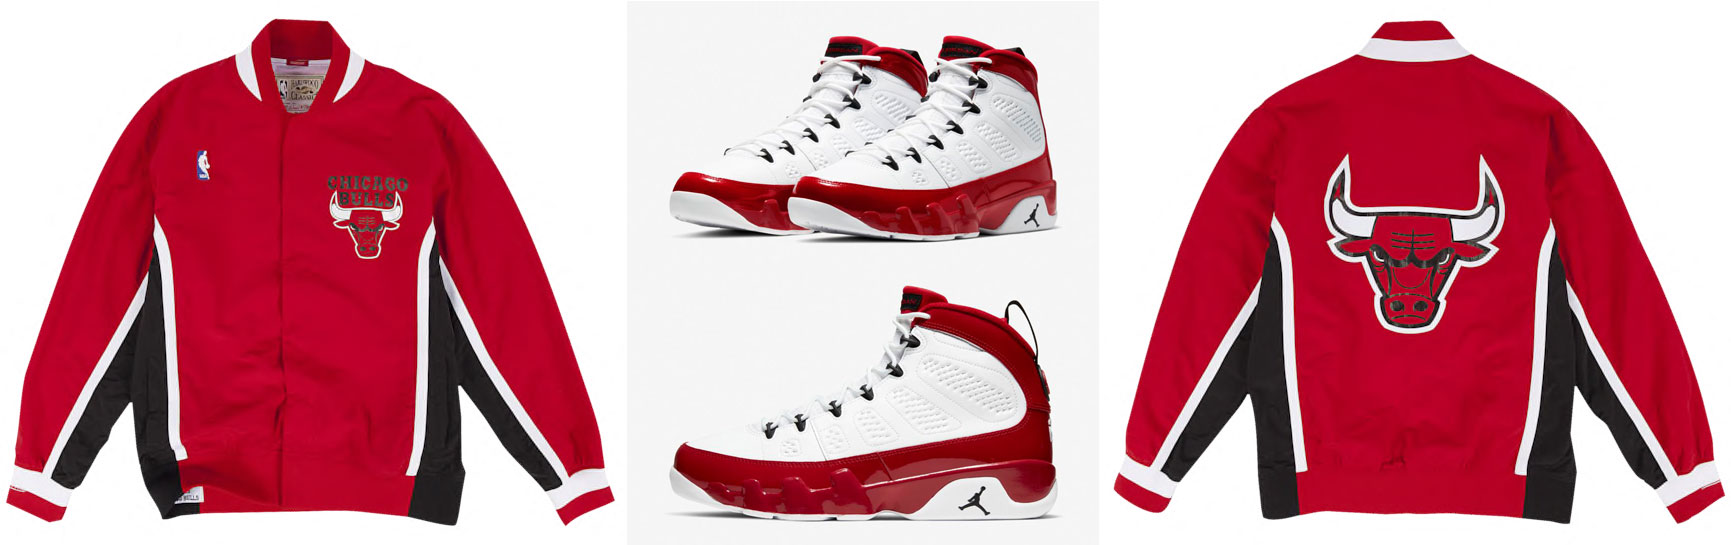 gym red 9s